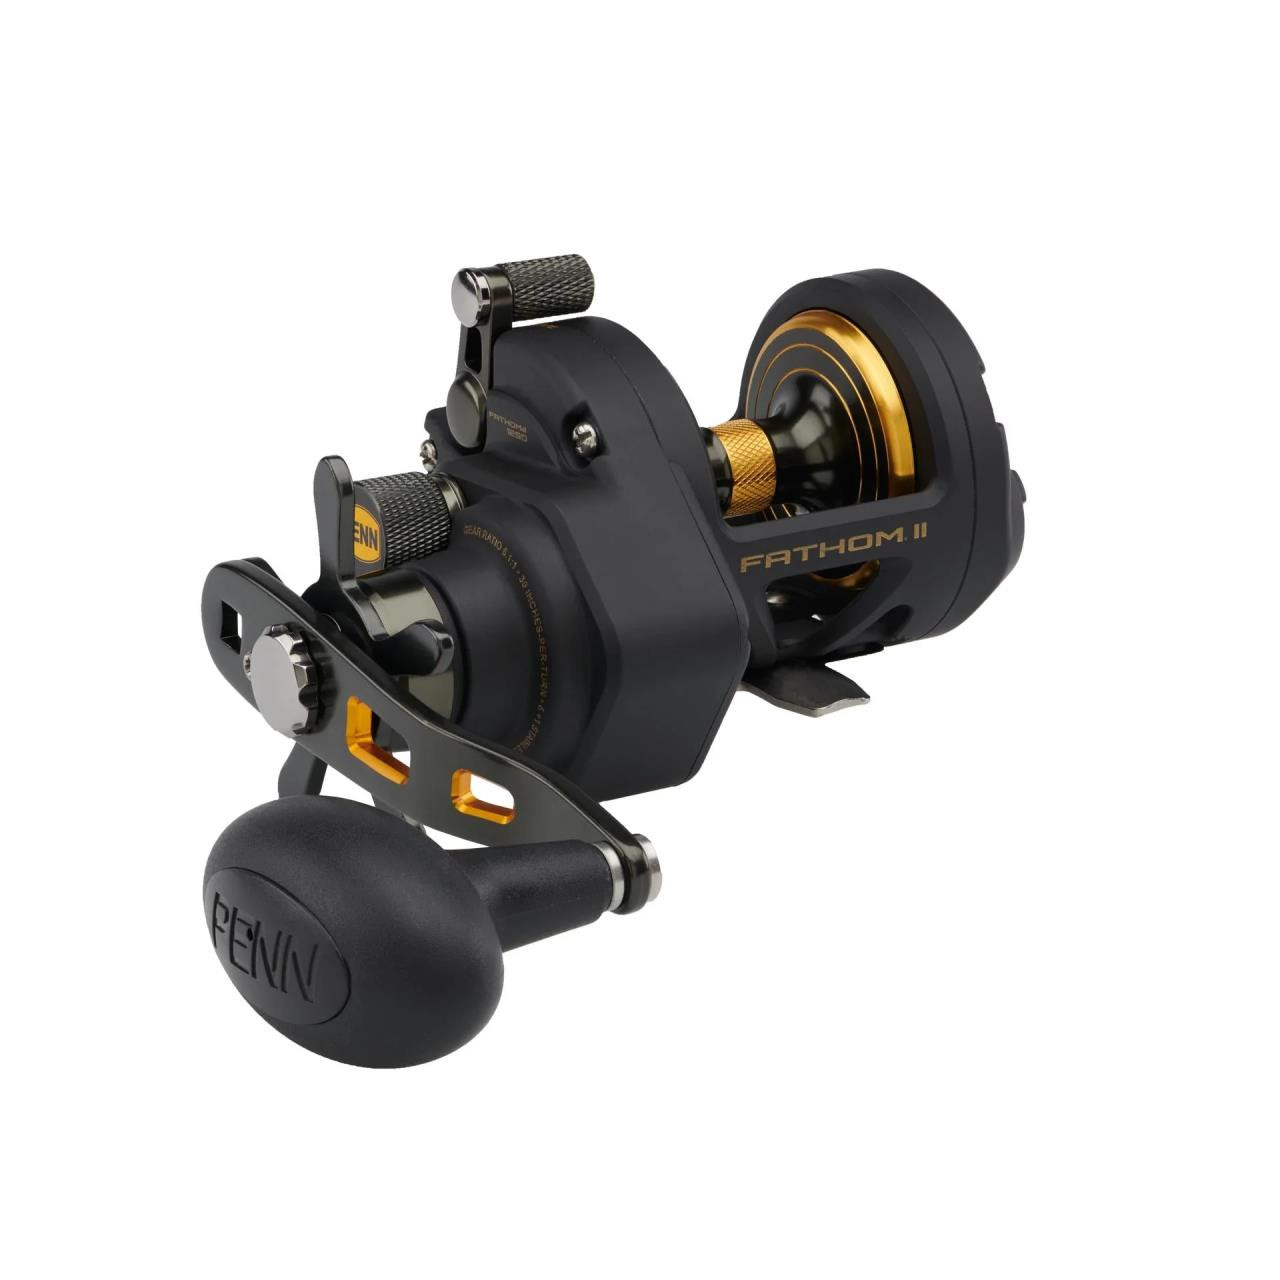 Penn Fathom II Star Drag Conventional Reel - 15 - 6.1:1 - Right Handed -  Dance's Sporting Goods